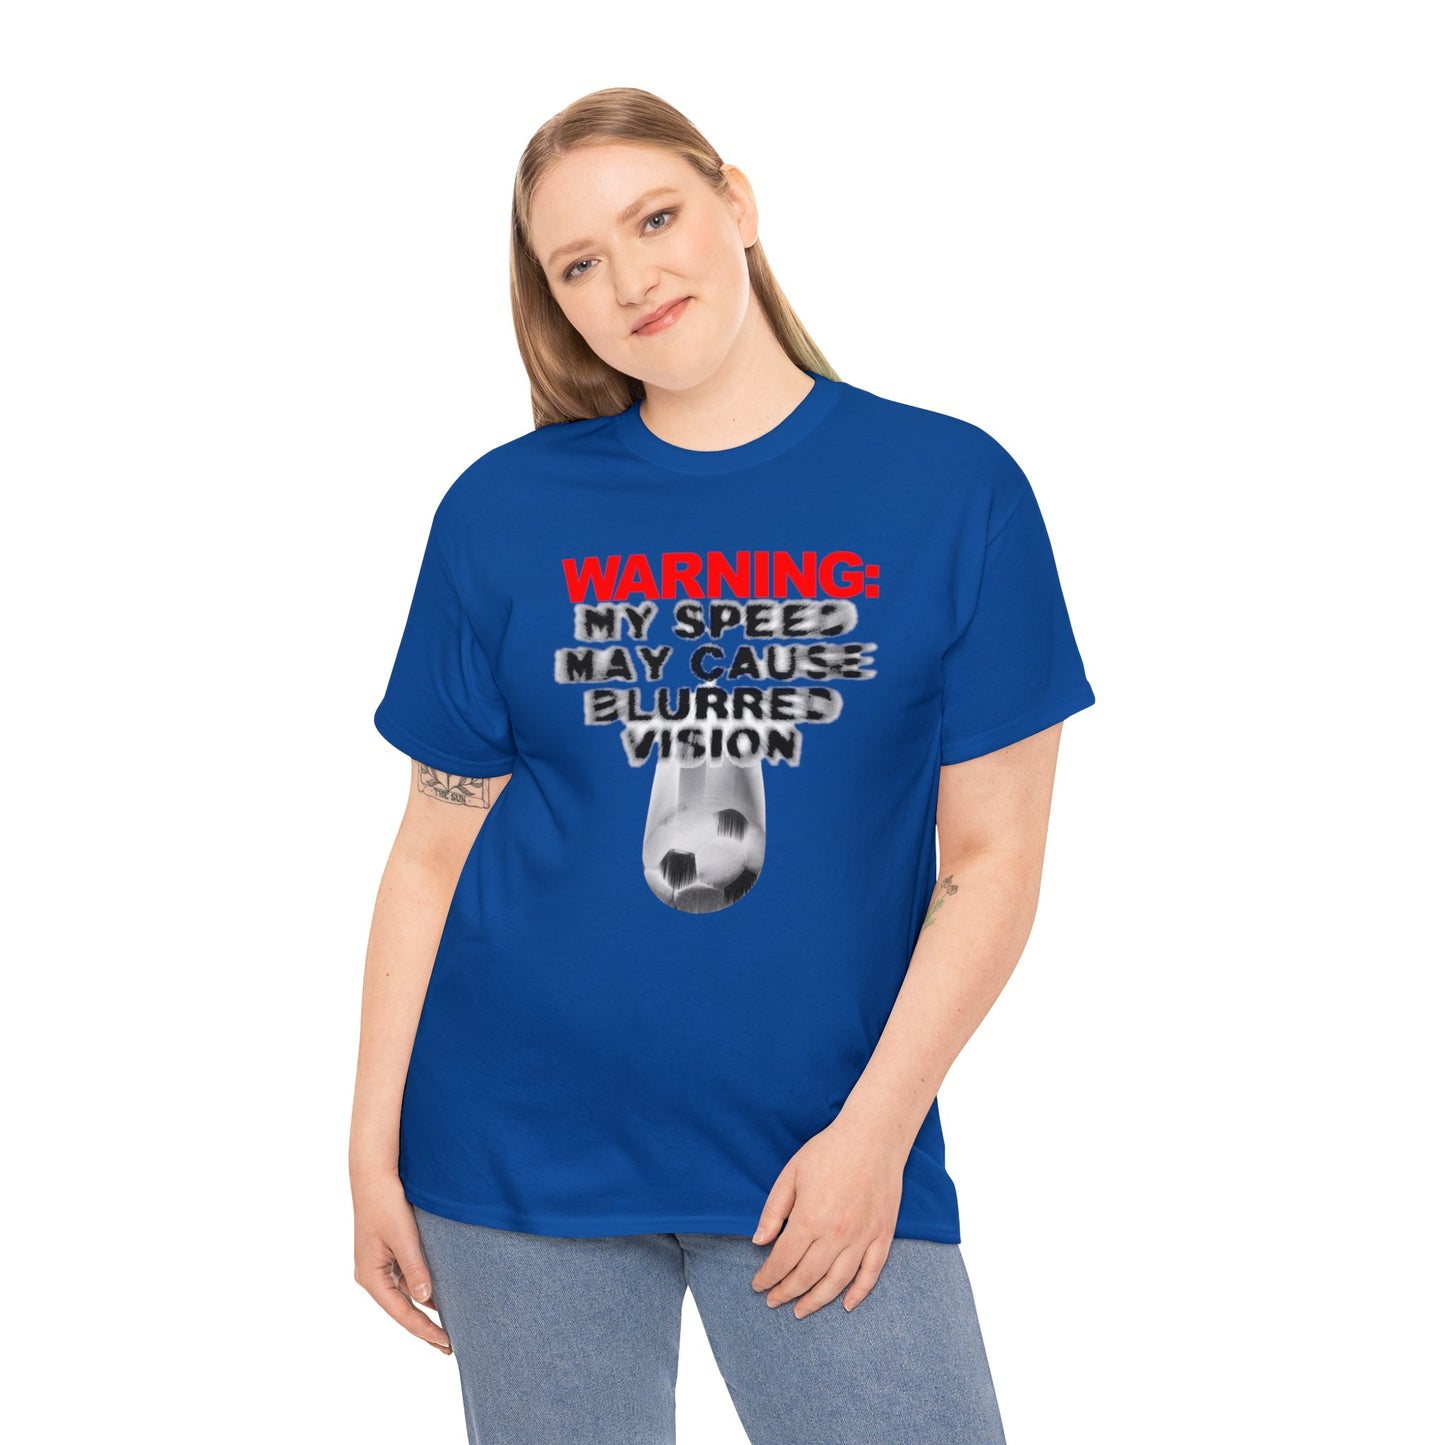 Warning My Speed May Cause Blurred Vision Soccer T-Shirt, Fast Soccer Player, Blurry Type, Soccer T-Shirt Design, Soccer Gift,